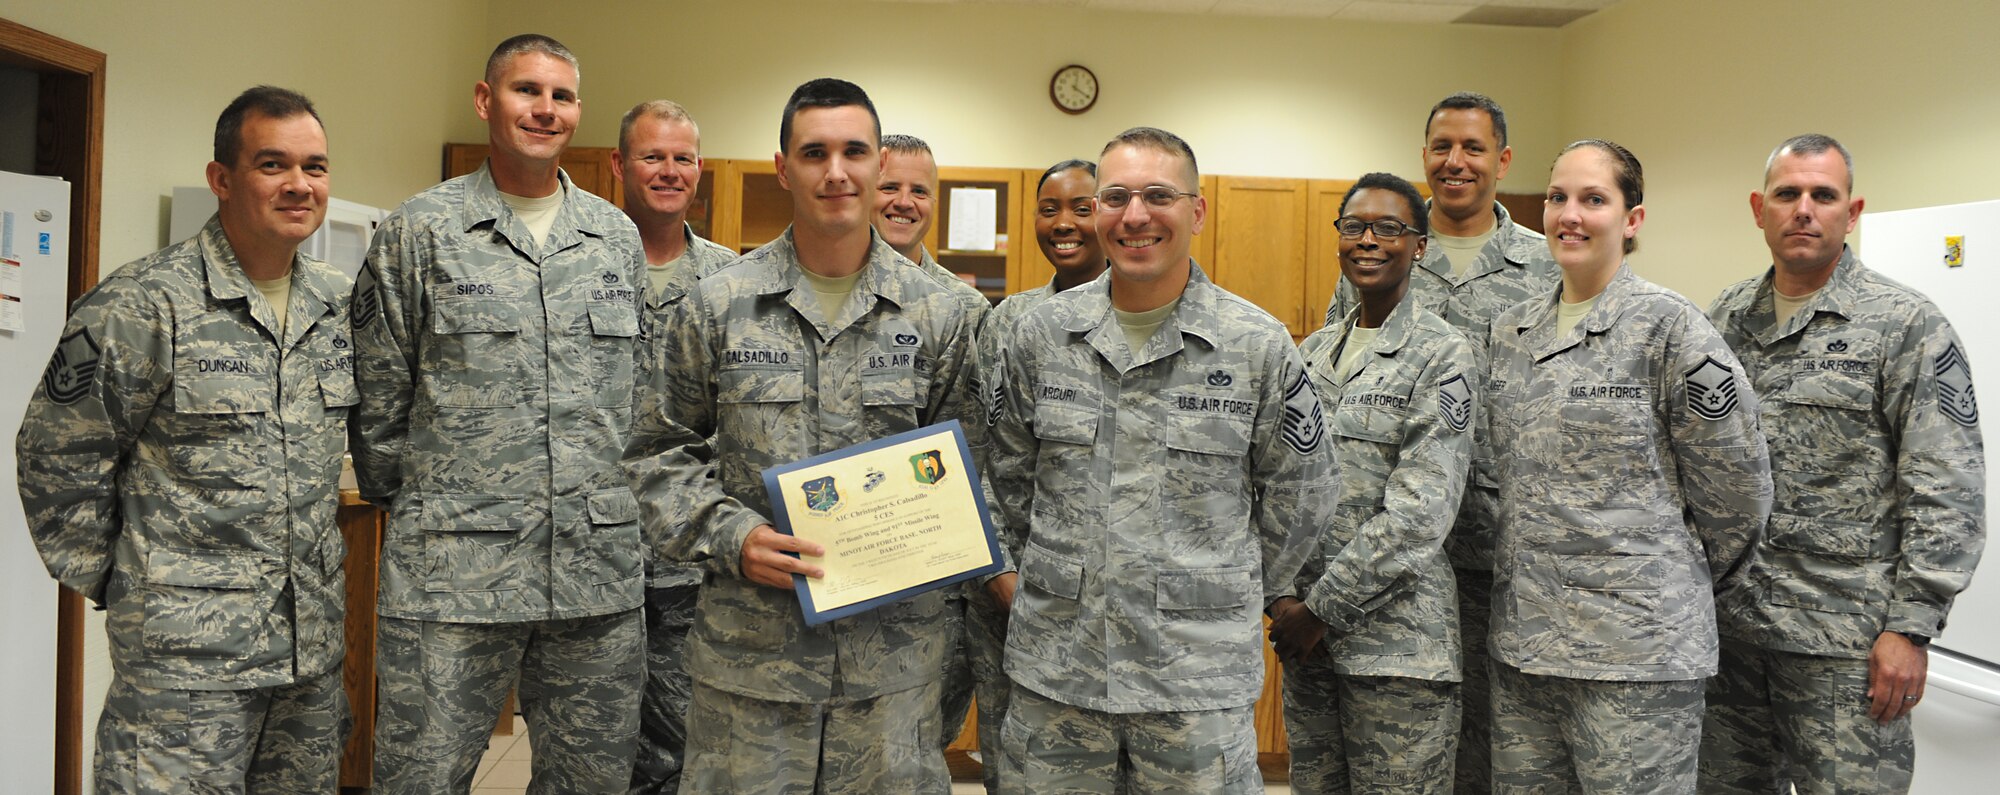 Minot Air Force Base’s Top-3 would like to recognize Airman 1st Class Christopher Calsadillo, assigned to the 5th Civil Engineer Squadron, for his commitment to his squadron and the overall mission of the base.  His display of professionalism and excellence went above and beyond while supporting all duties bestowed upon him. (U.S. Air Force photo/Airman 1st Class Stephanie Ashley) 